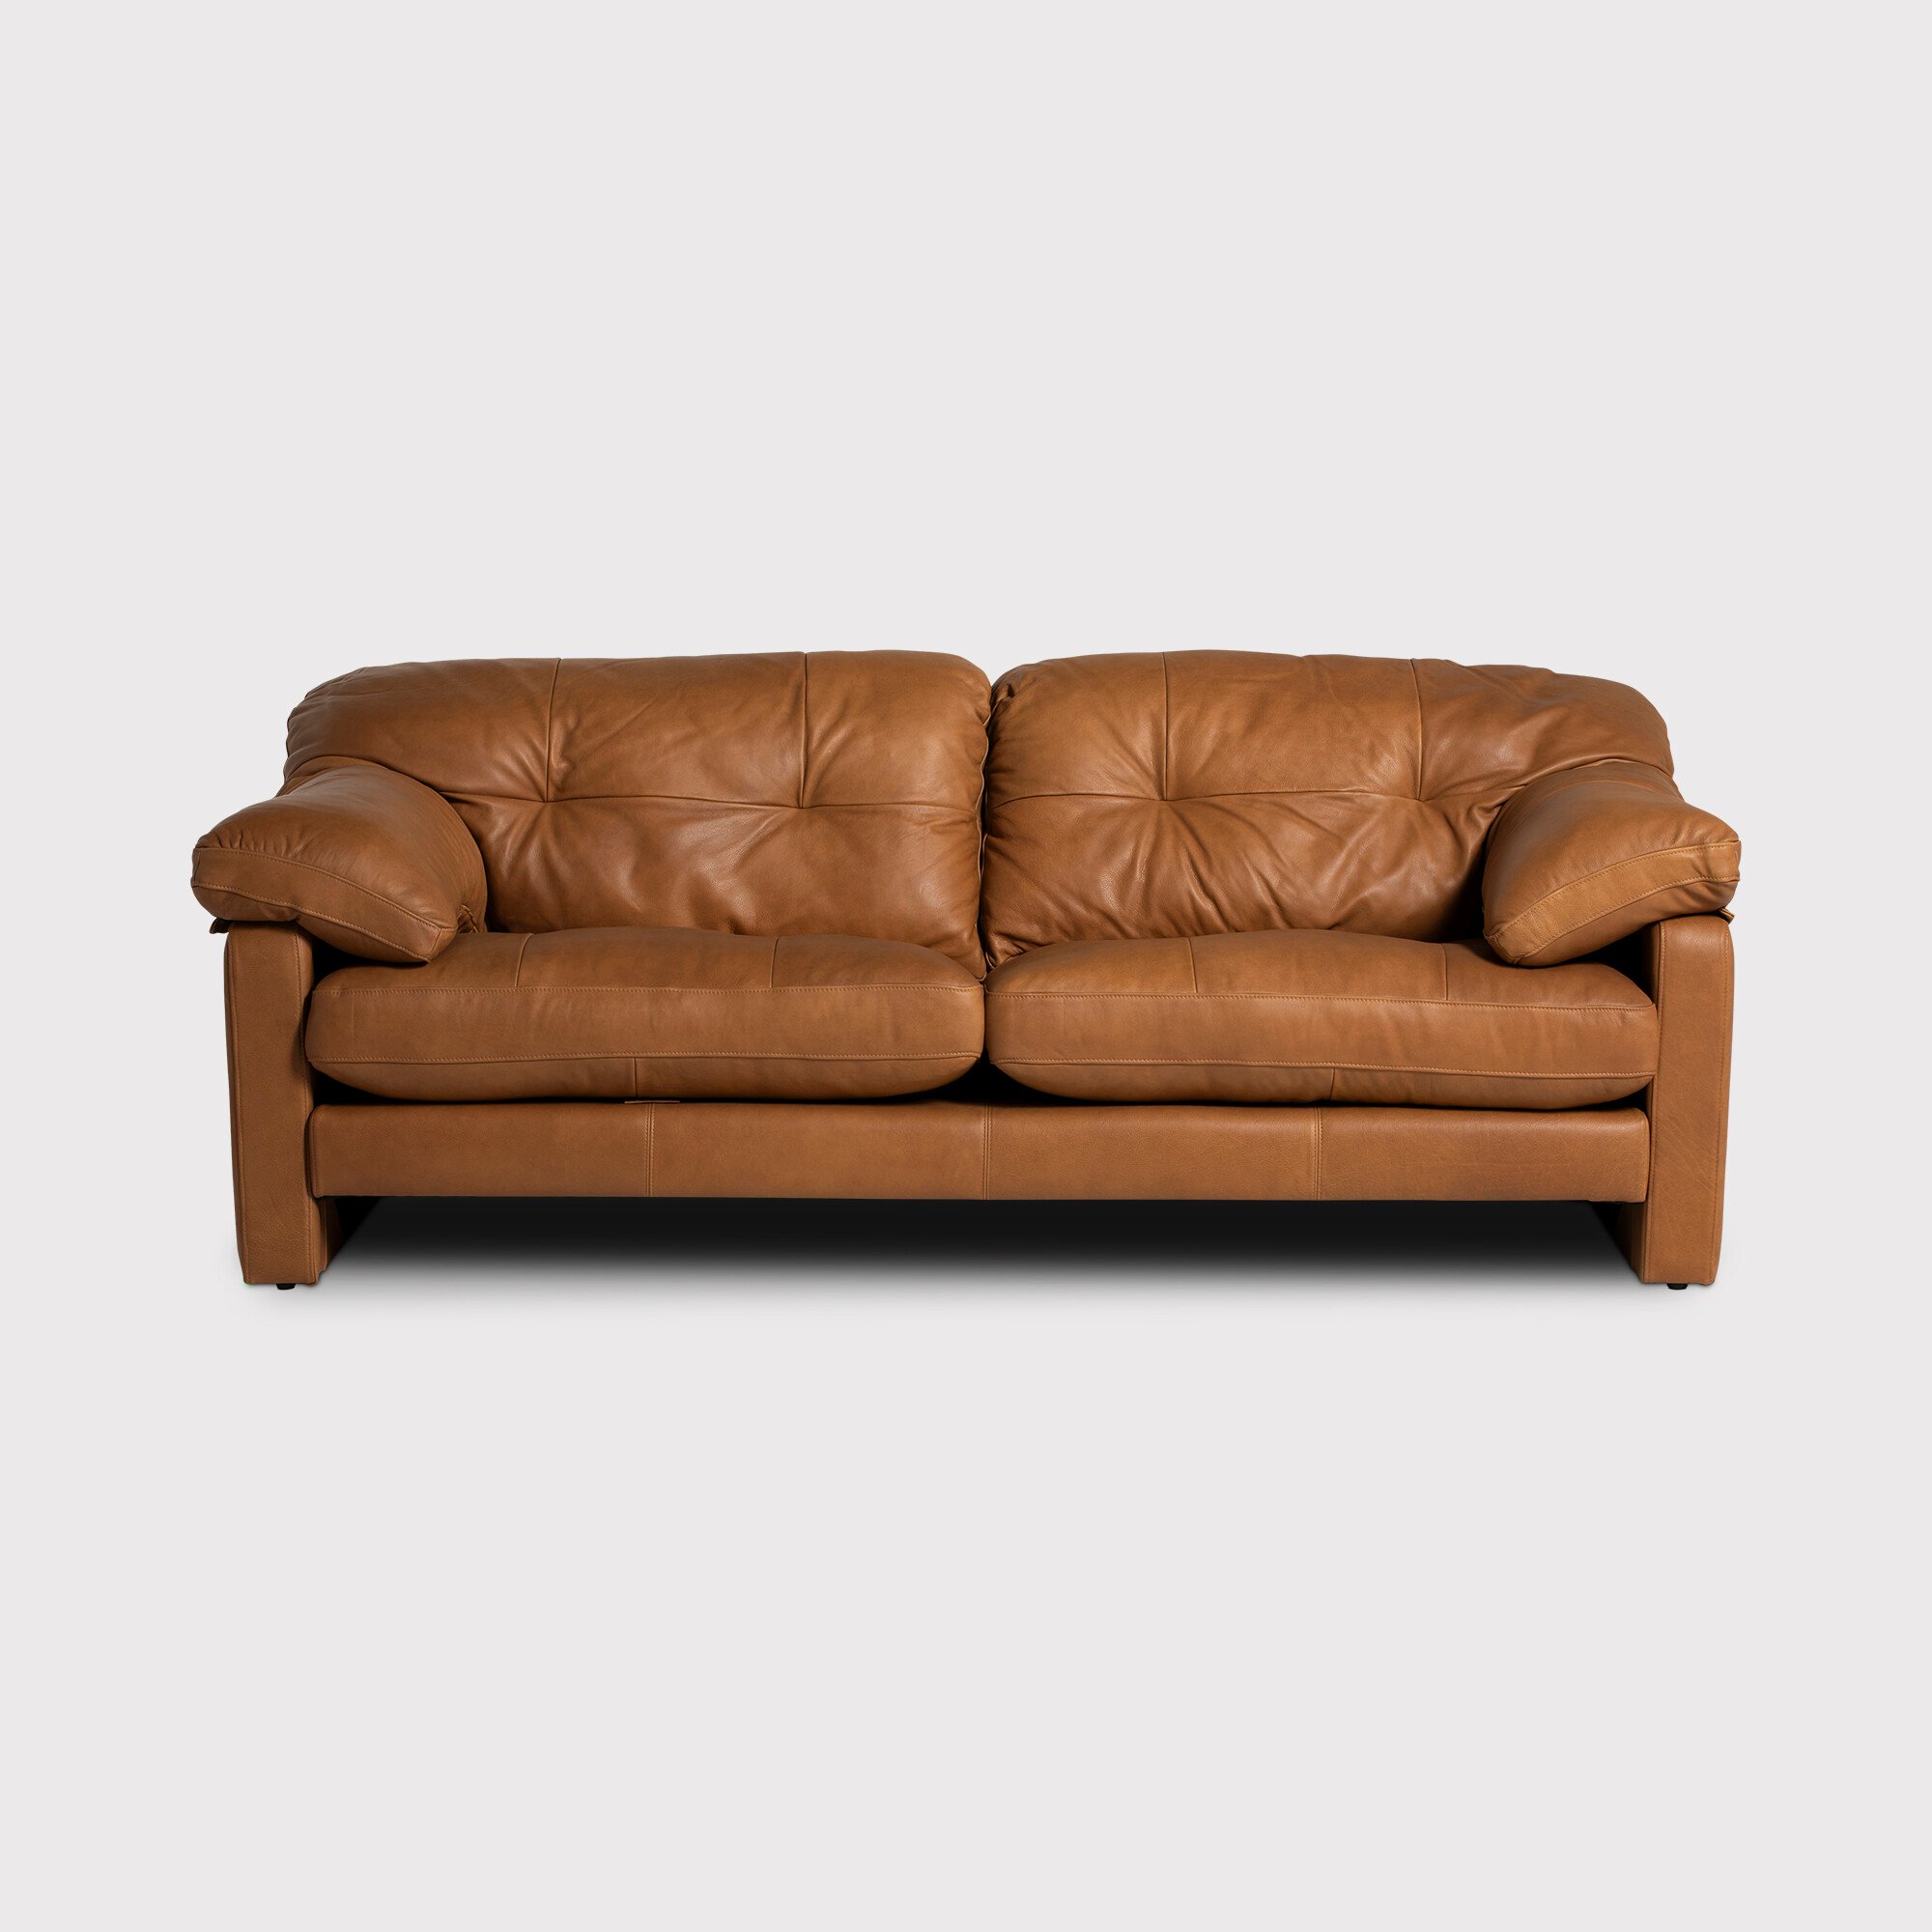 Penley 3 Seater Sofa, Brown | Barker & Stonehouse